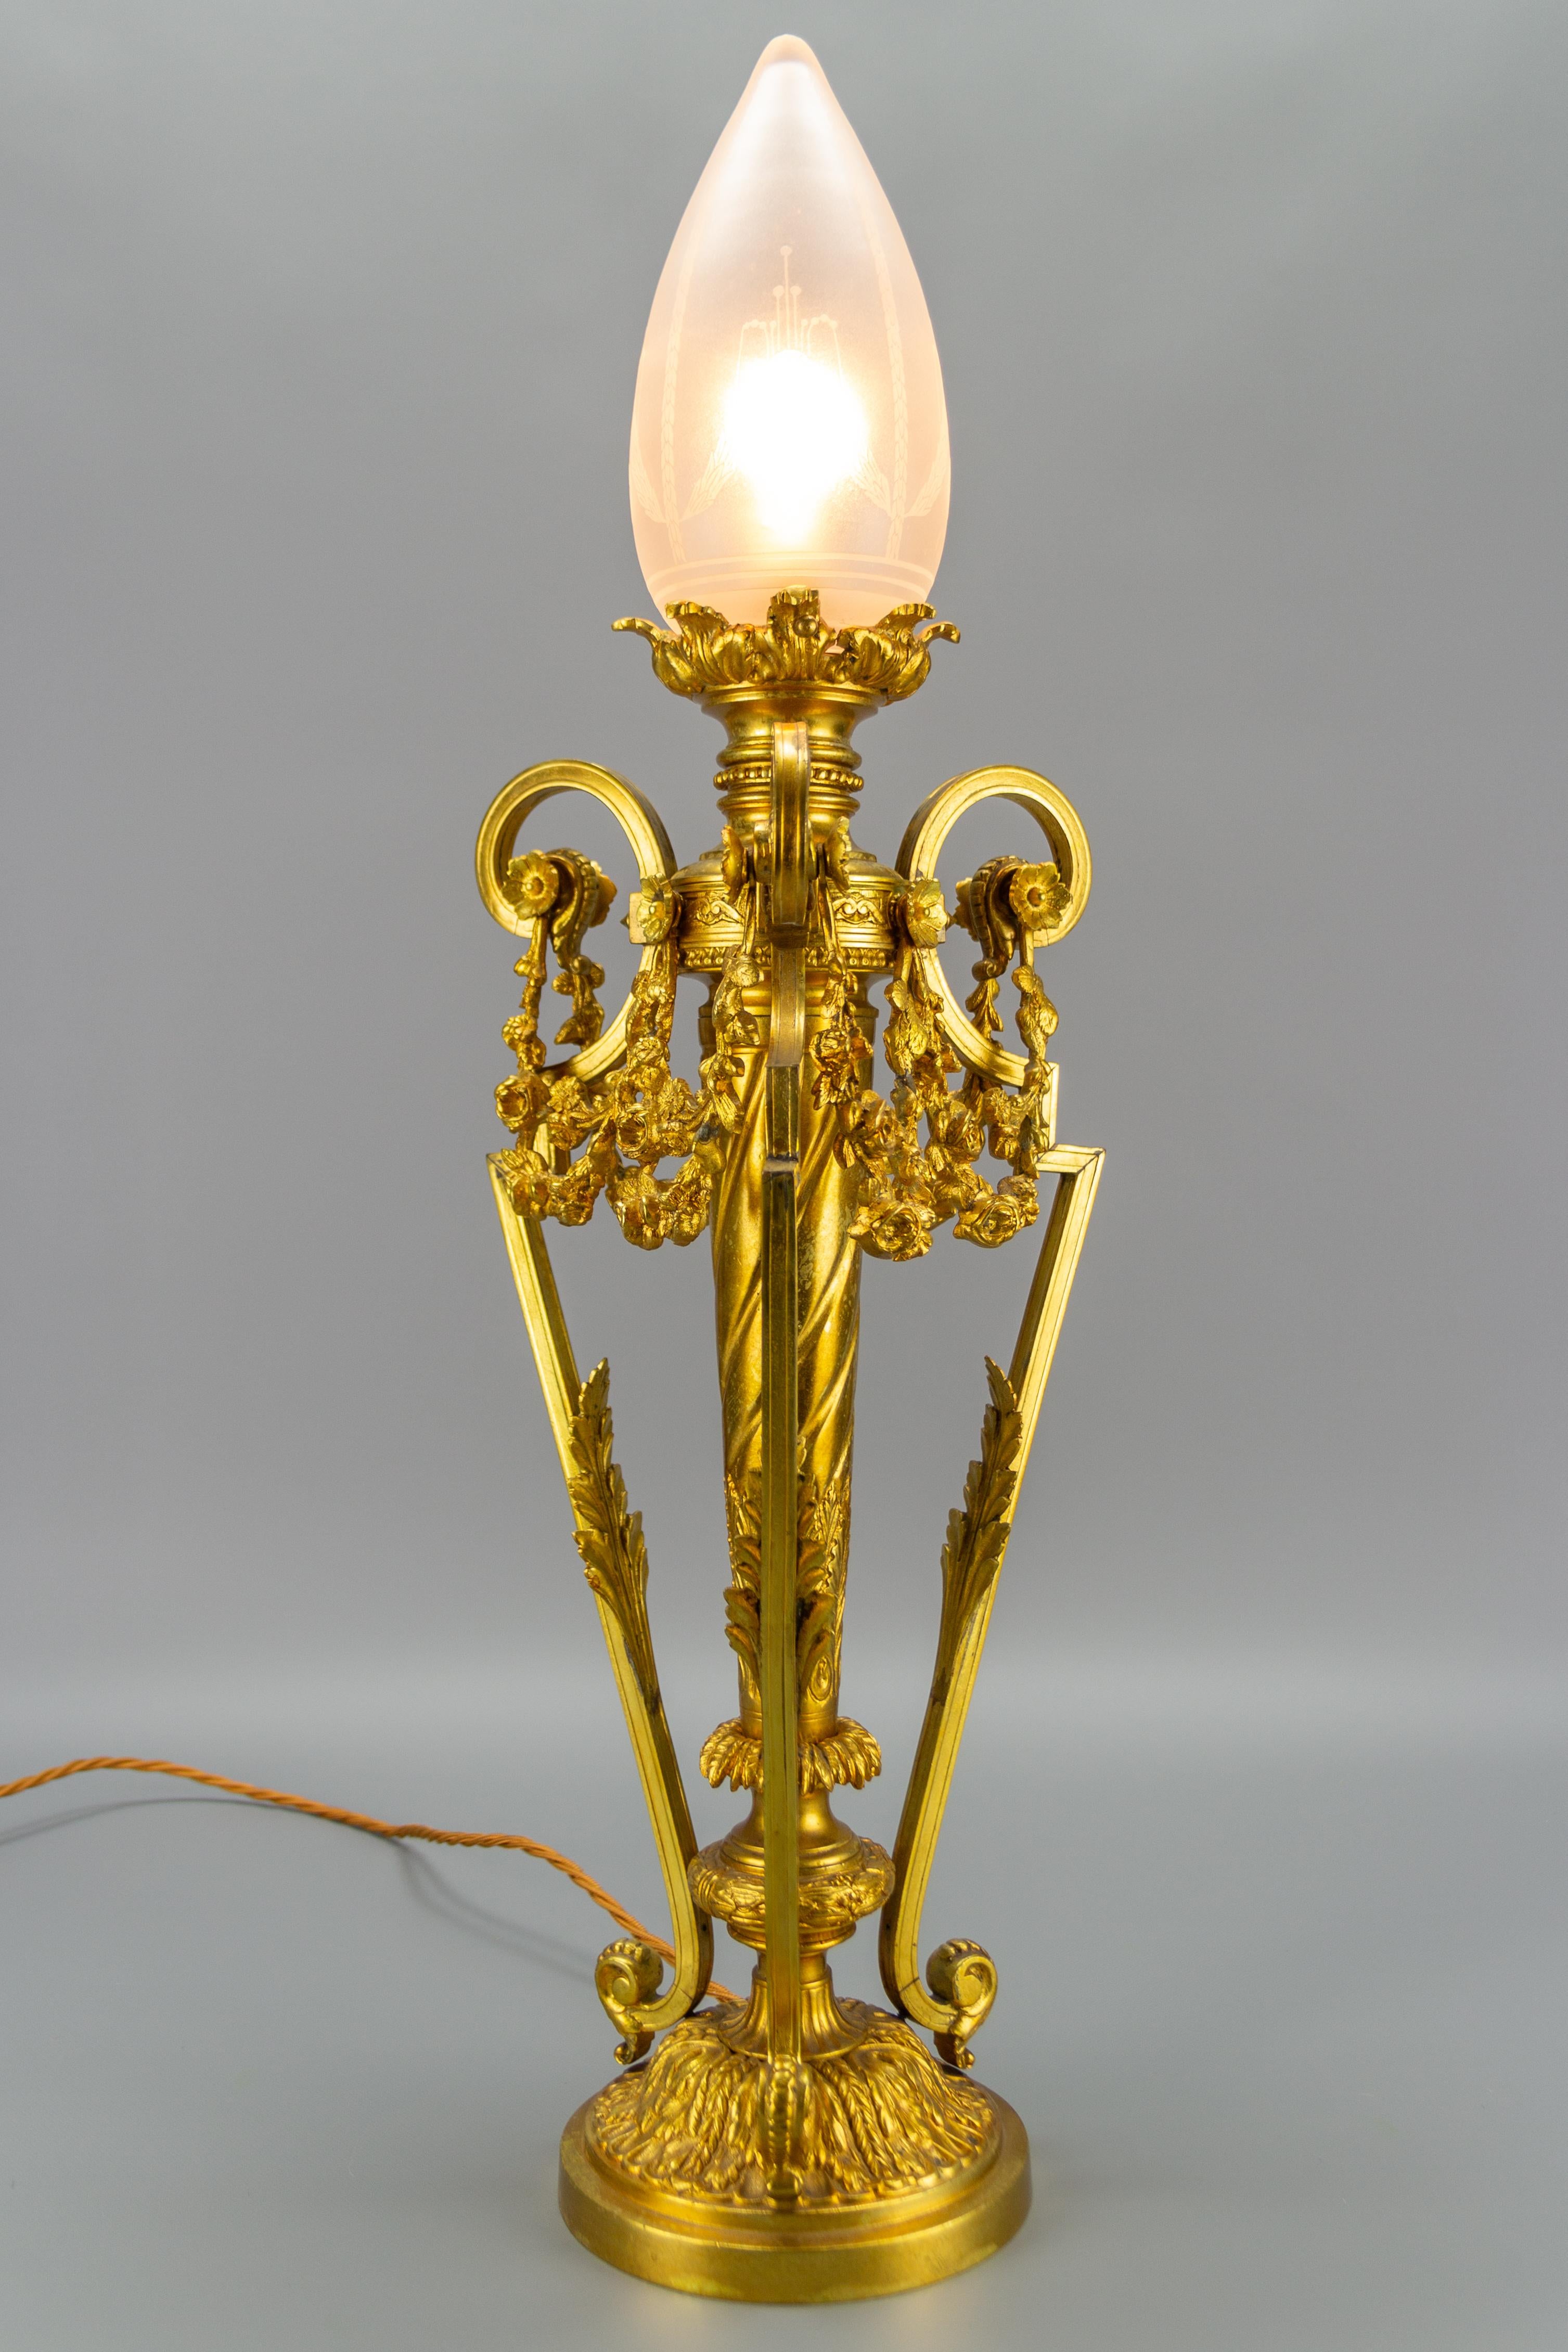 French Louis XVI style gilt bronze newel post lamp with frosted glass lampshade. Richly decorated with bronze decors in a form of acanthus leaves and floral garland drapes. The beautiful frosted glass oviform lampshade has delicate decorations.
One